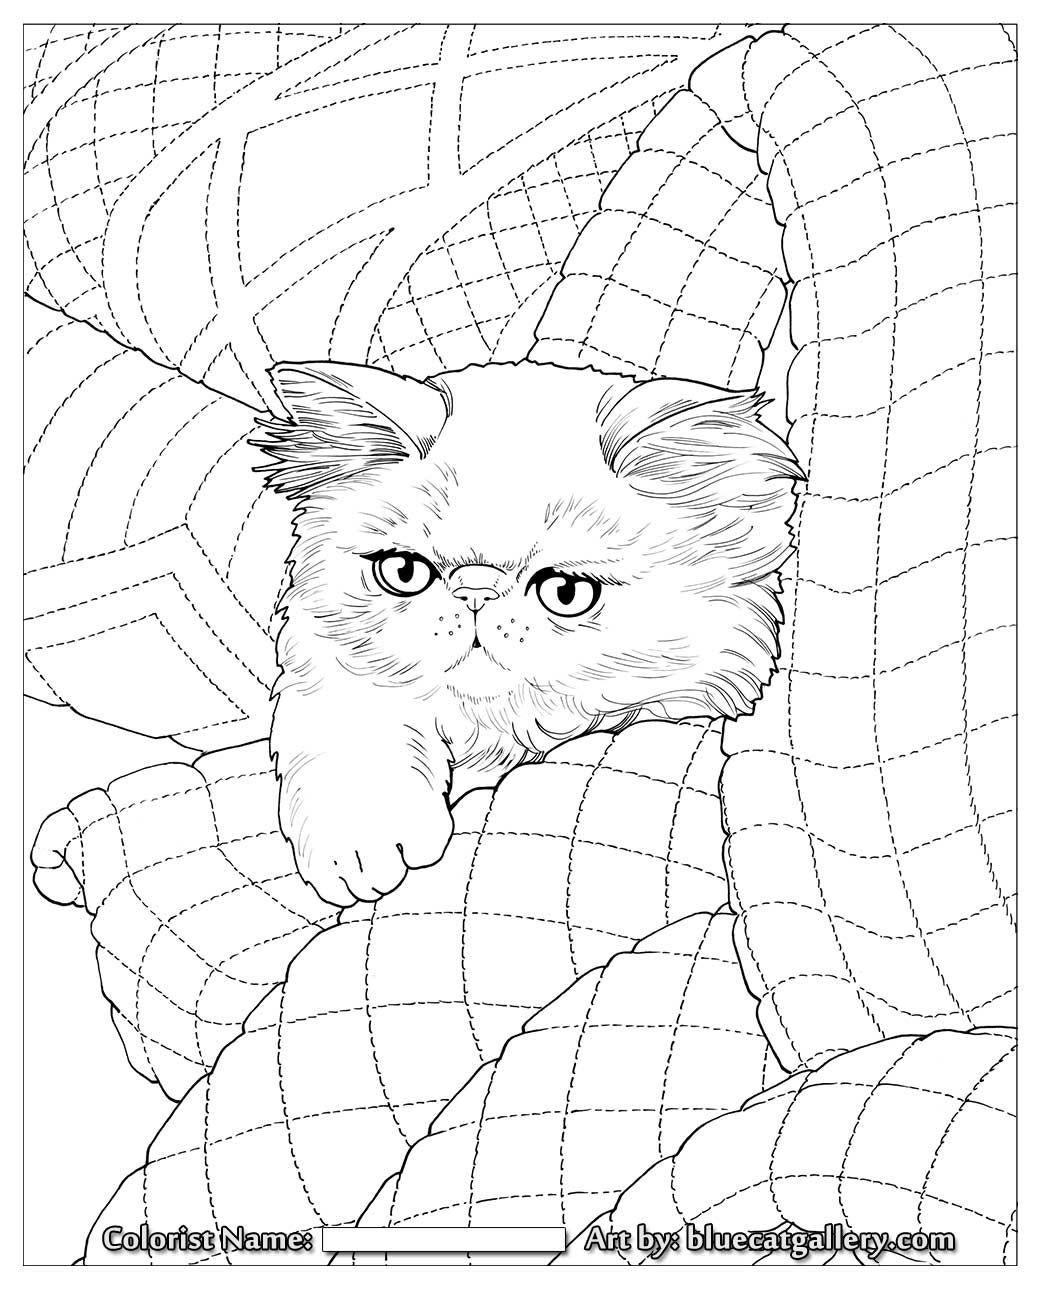 Quilt Blocks Coloring Pages to Print Inspirational Cats & Quilts ...